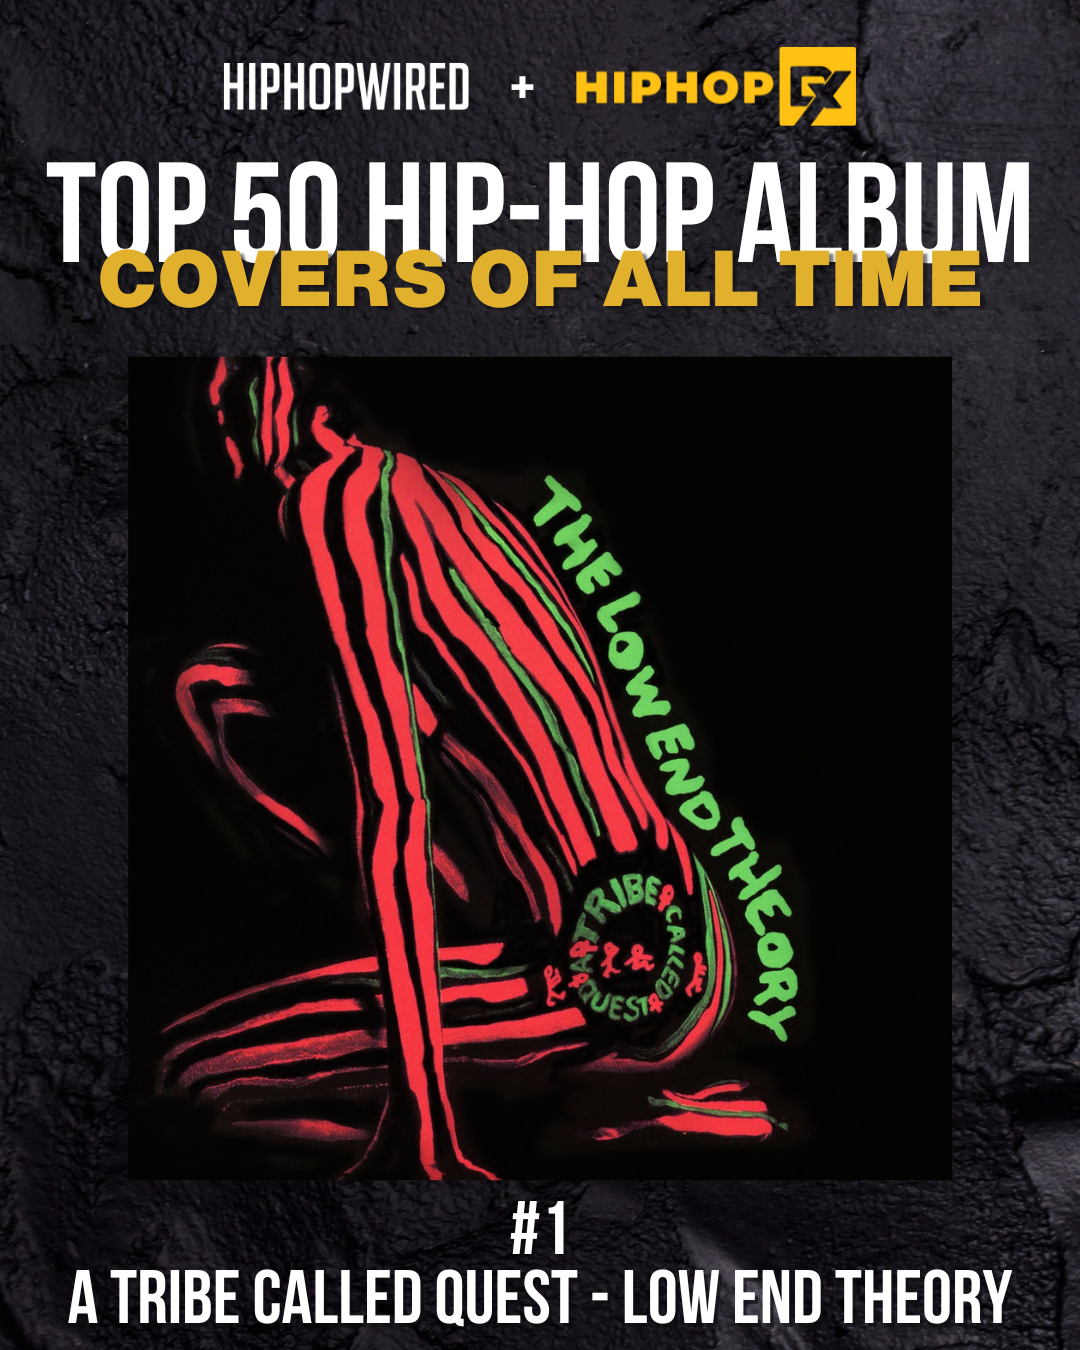 Guess Which Projects Top The Best Hip-Hop Album Covers List? #hiphop